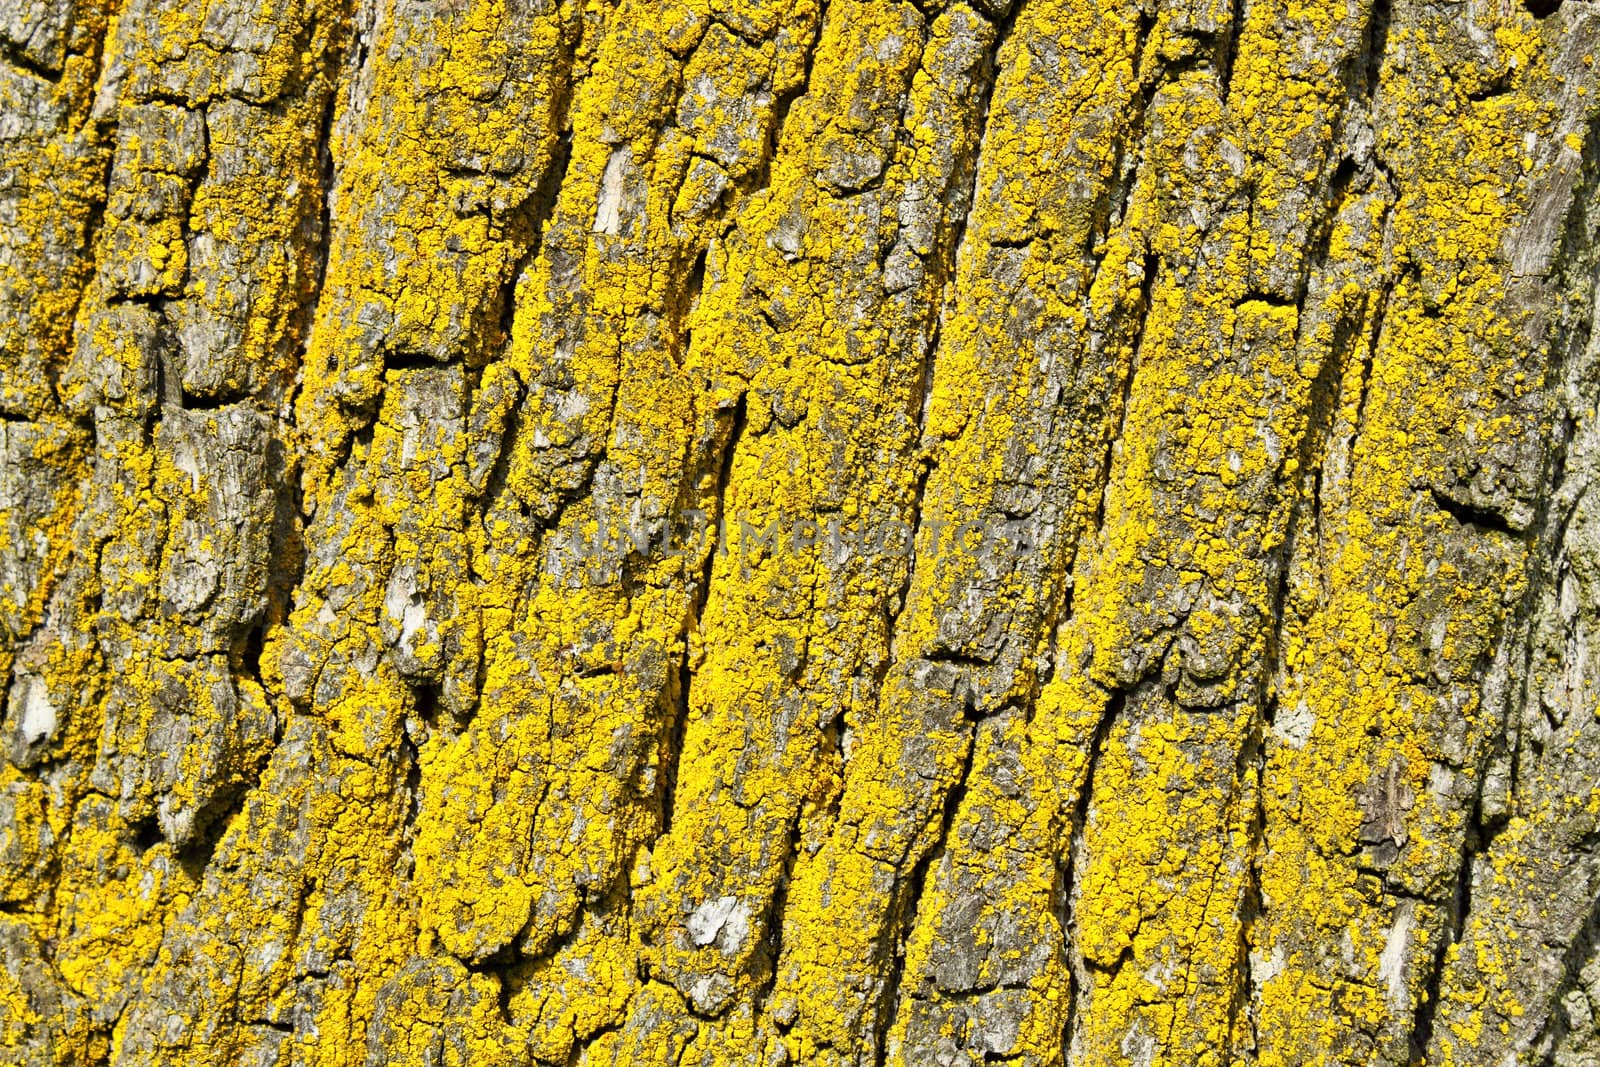 tree bark texture, pattern for background or backdrop use